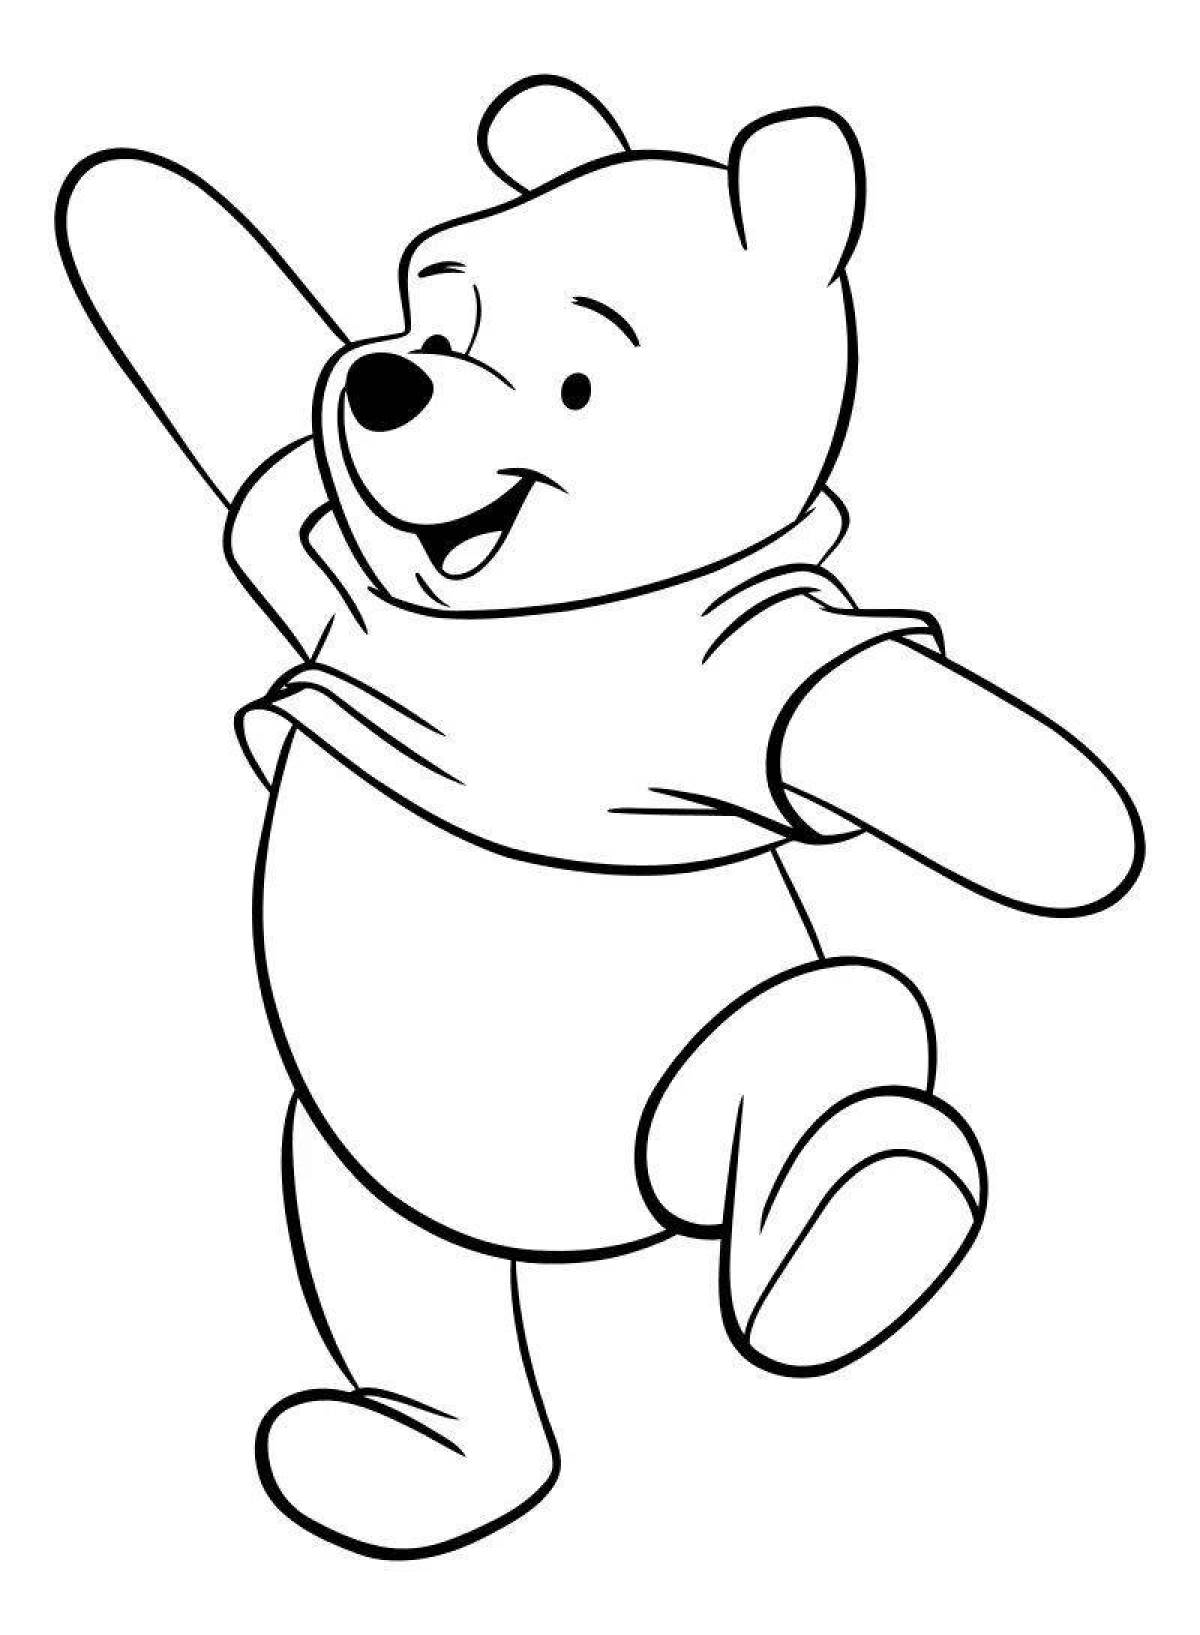 Coloring fairy tale winnie the pooh